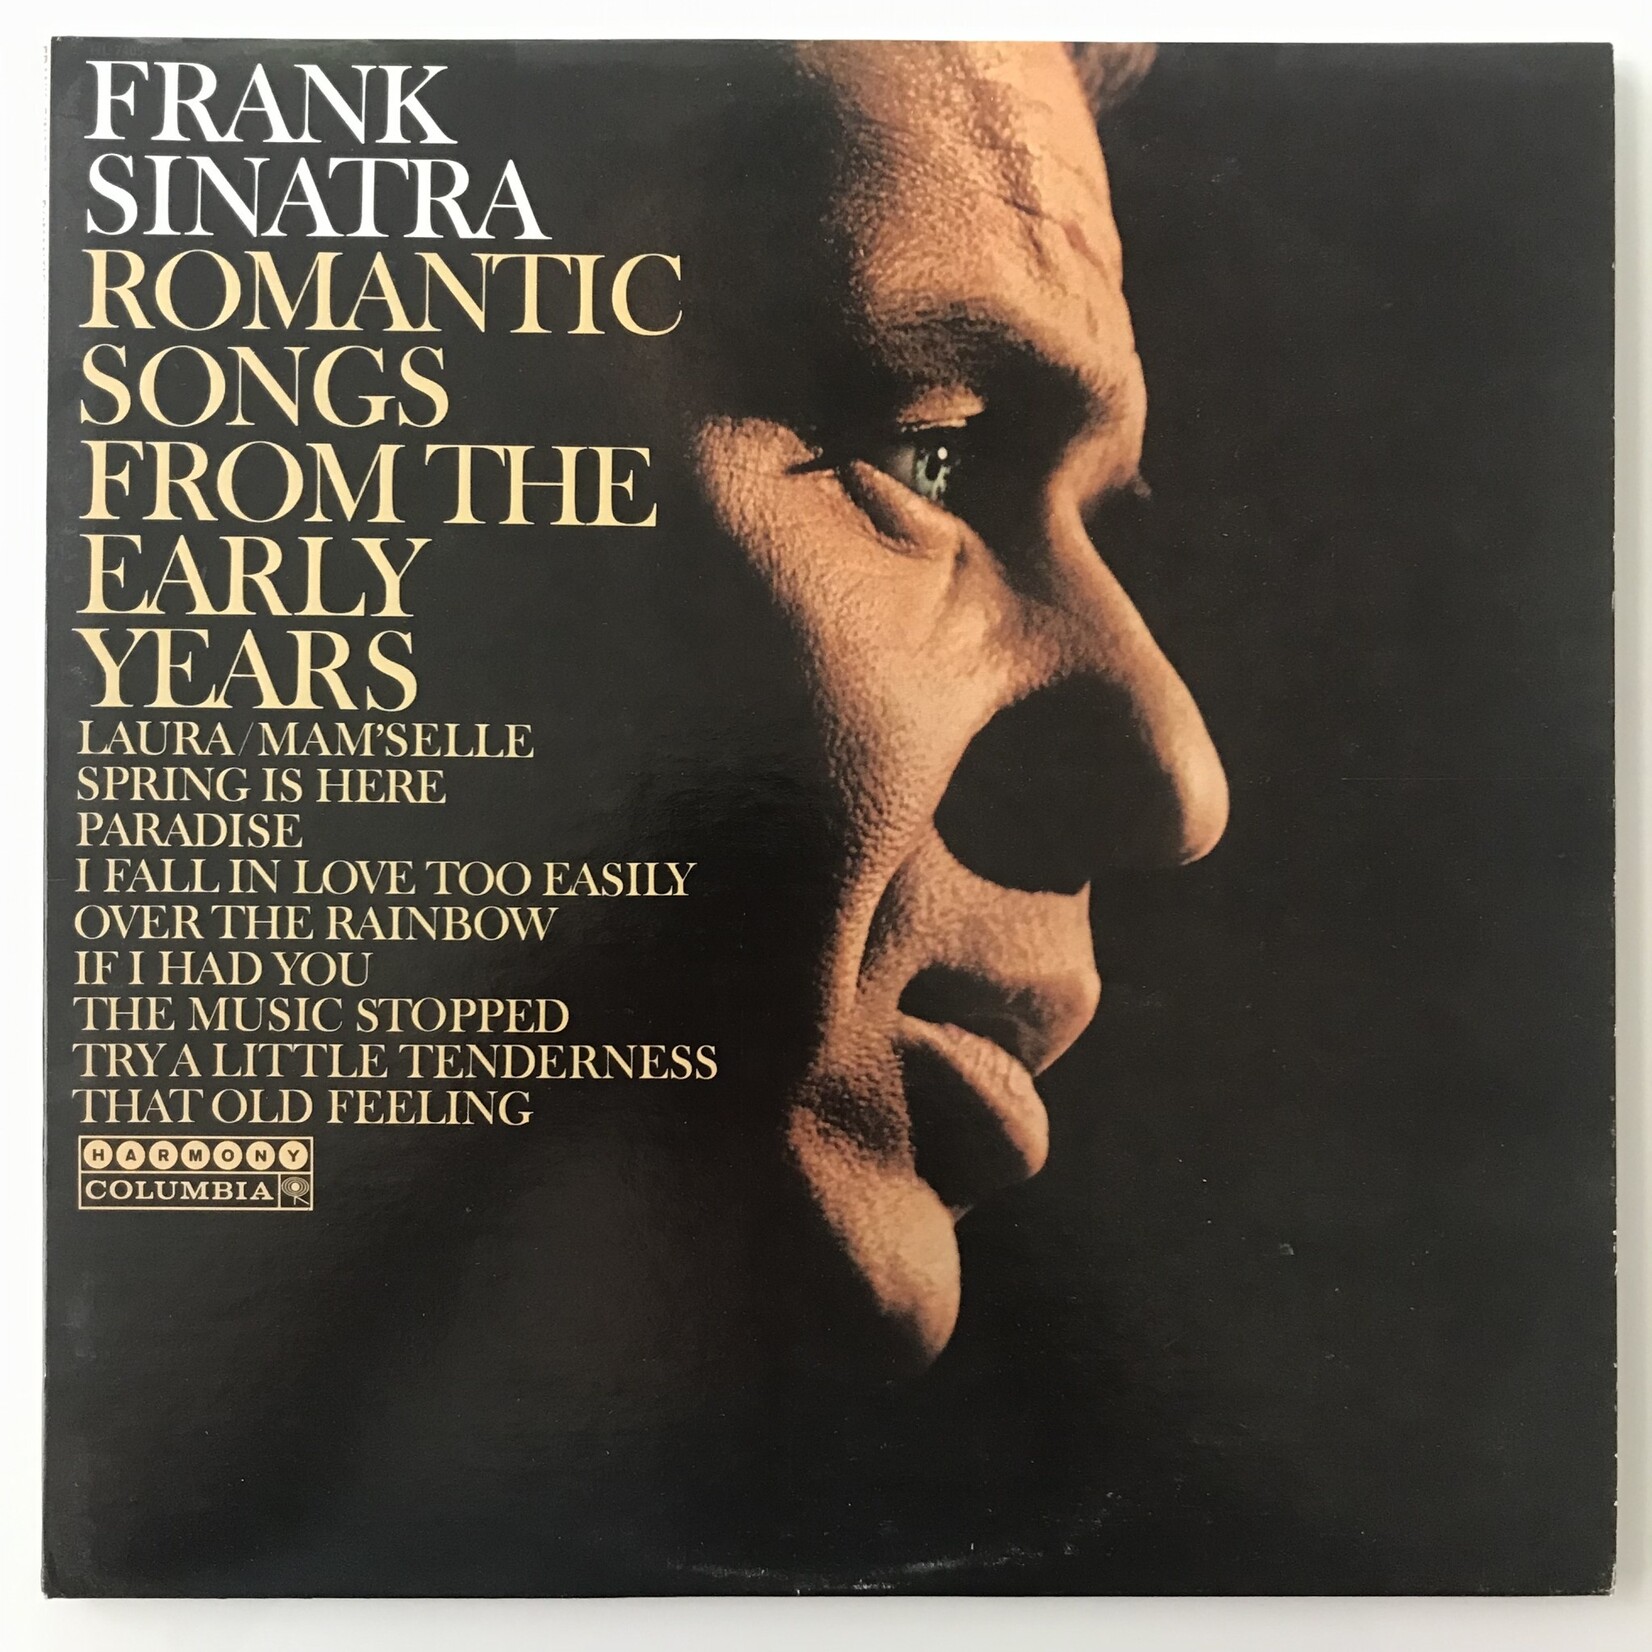 Frank Sinatra - Romantic Songs From The Early Years - Vinyl LP (USED)